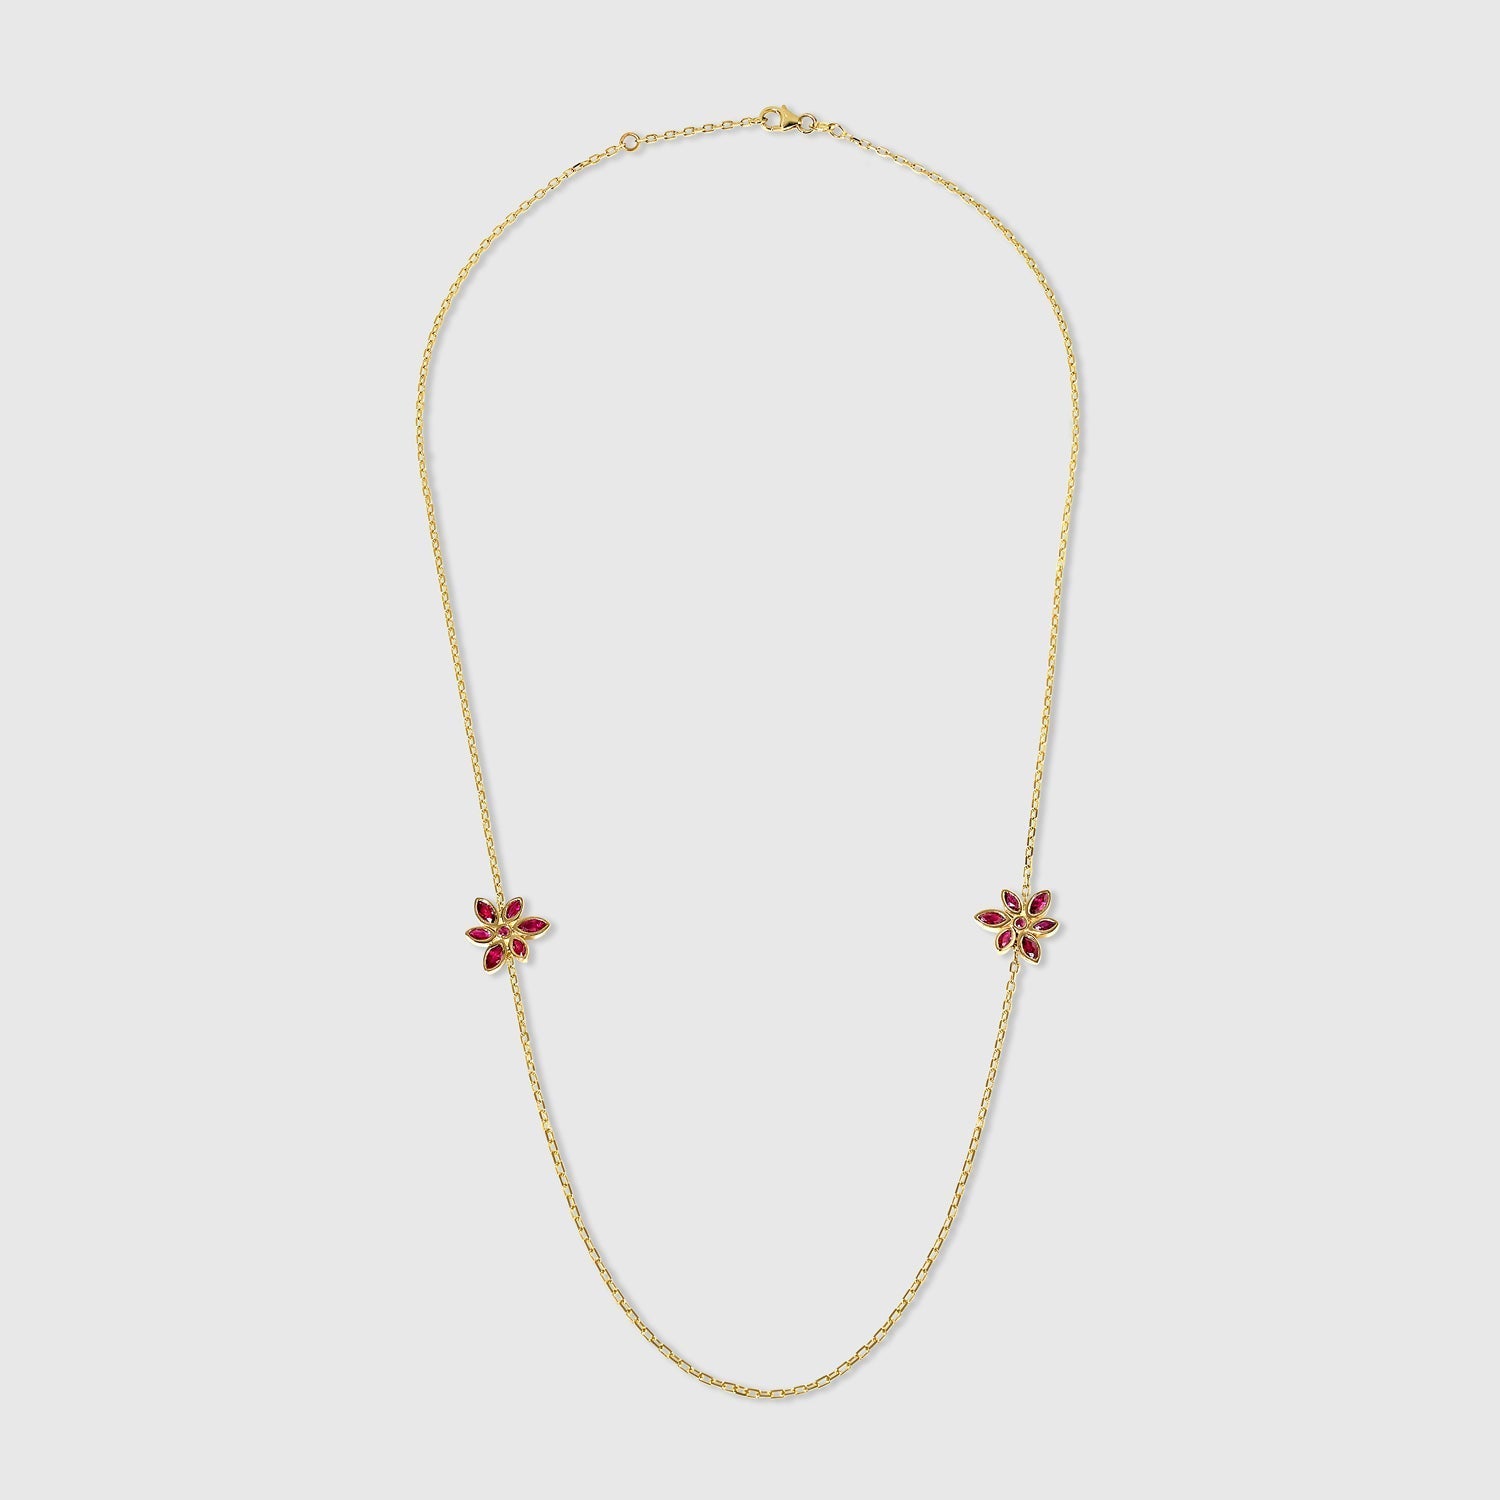 Maria - Ruby Flower Necklace – La Fleur Rouge Collection of Rubies & Solid Gold - Aurora Laffite Jewelry